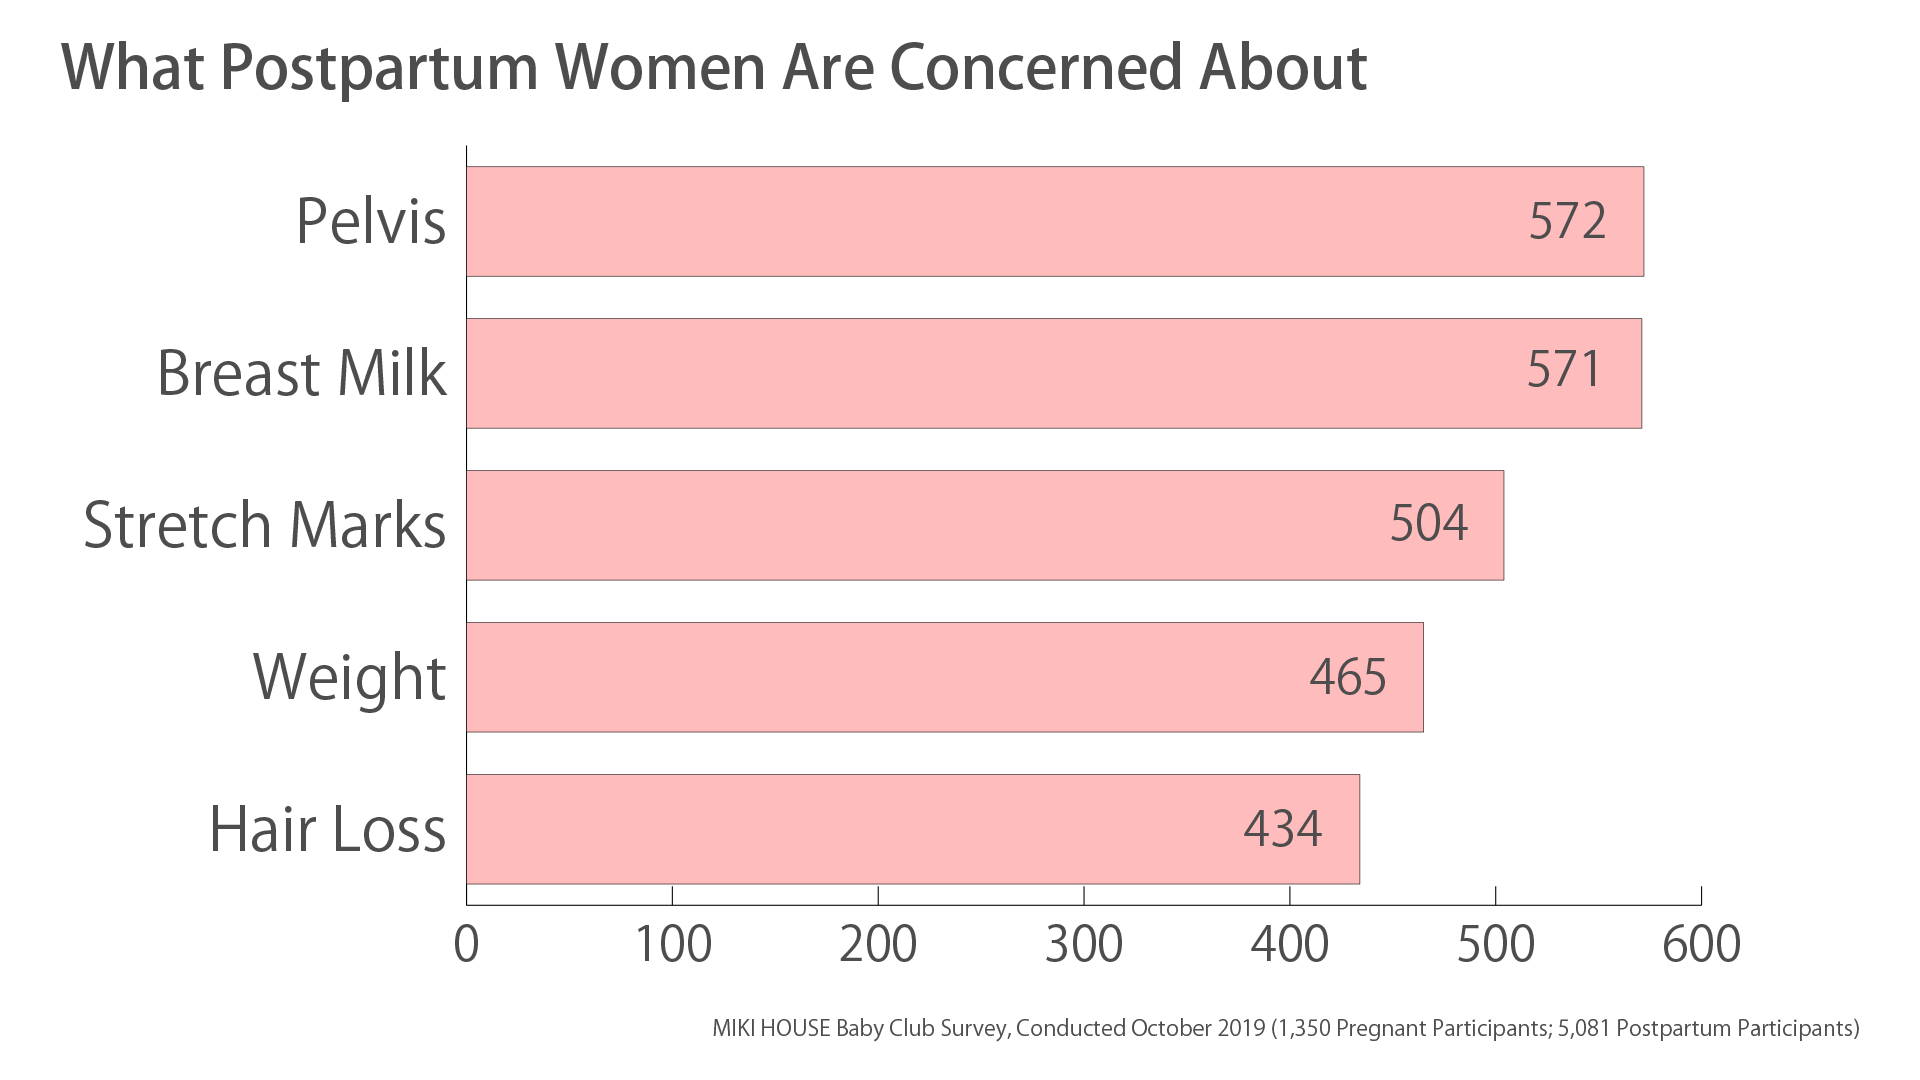 What Postpartum Women Are Concerned About